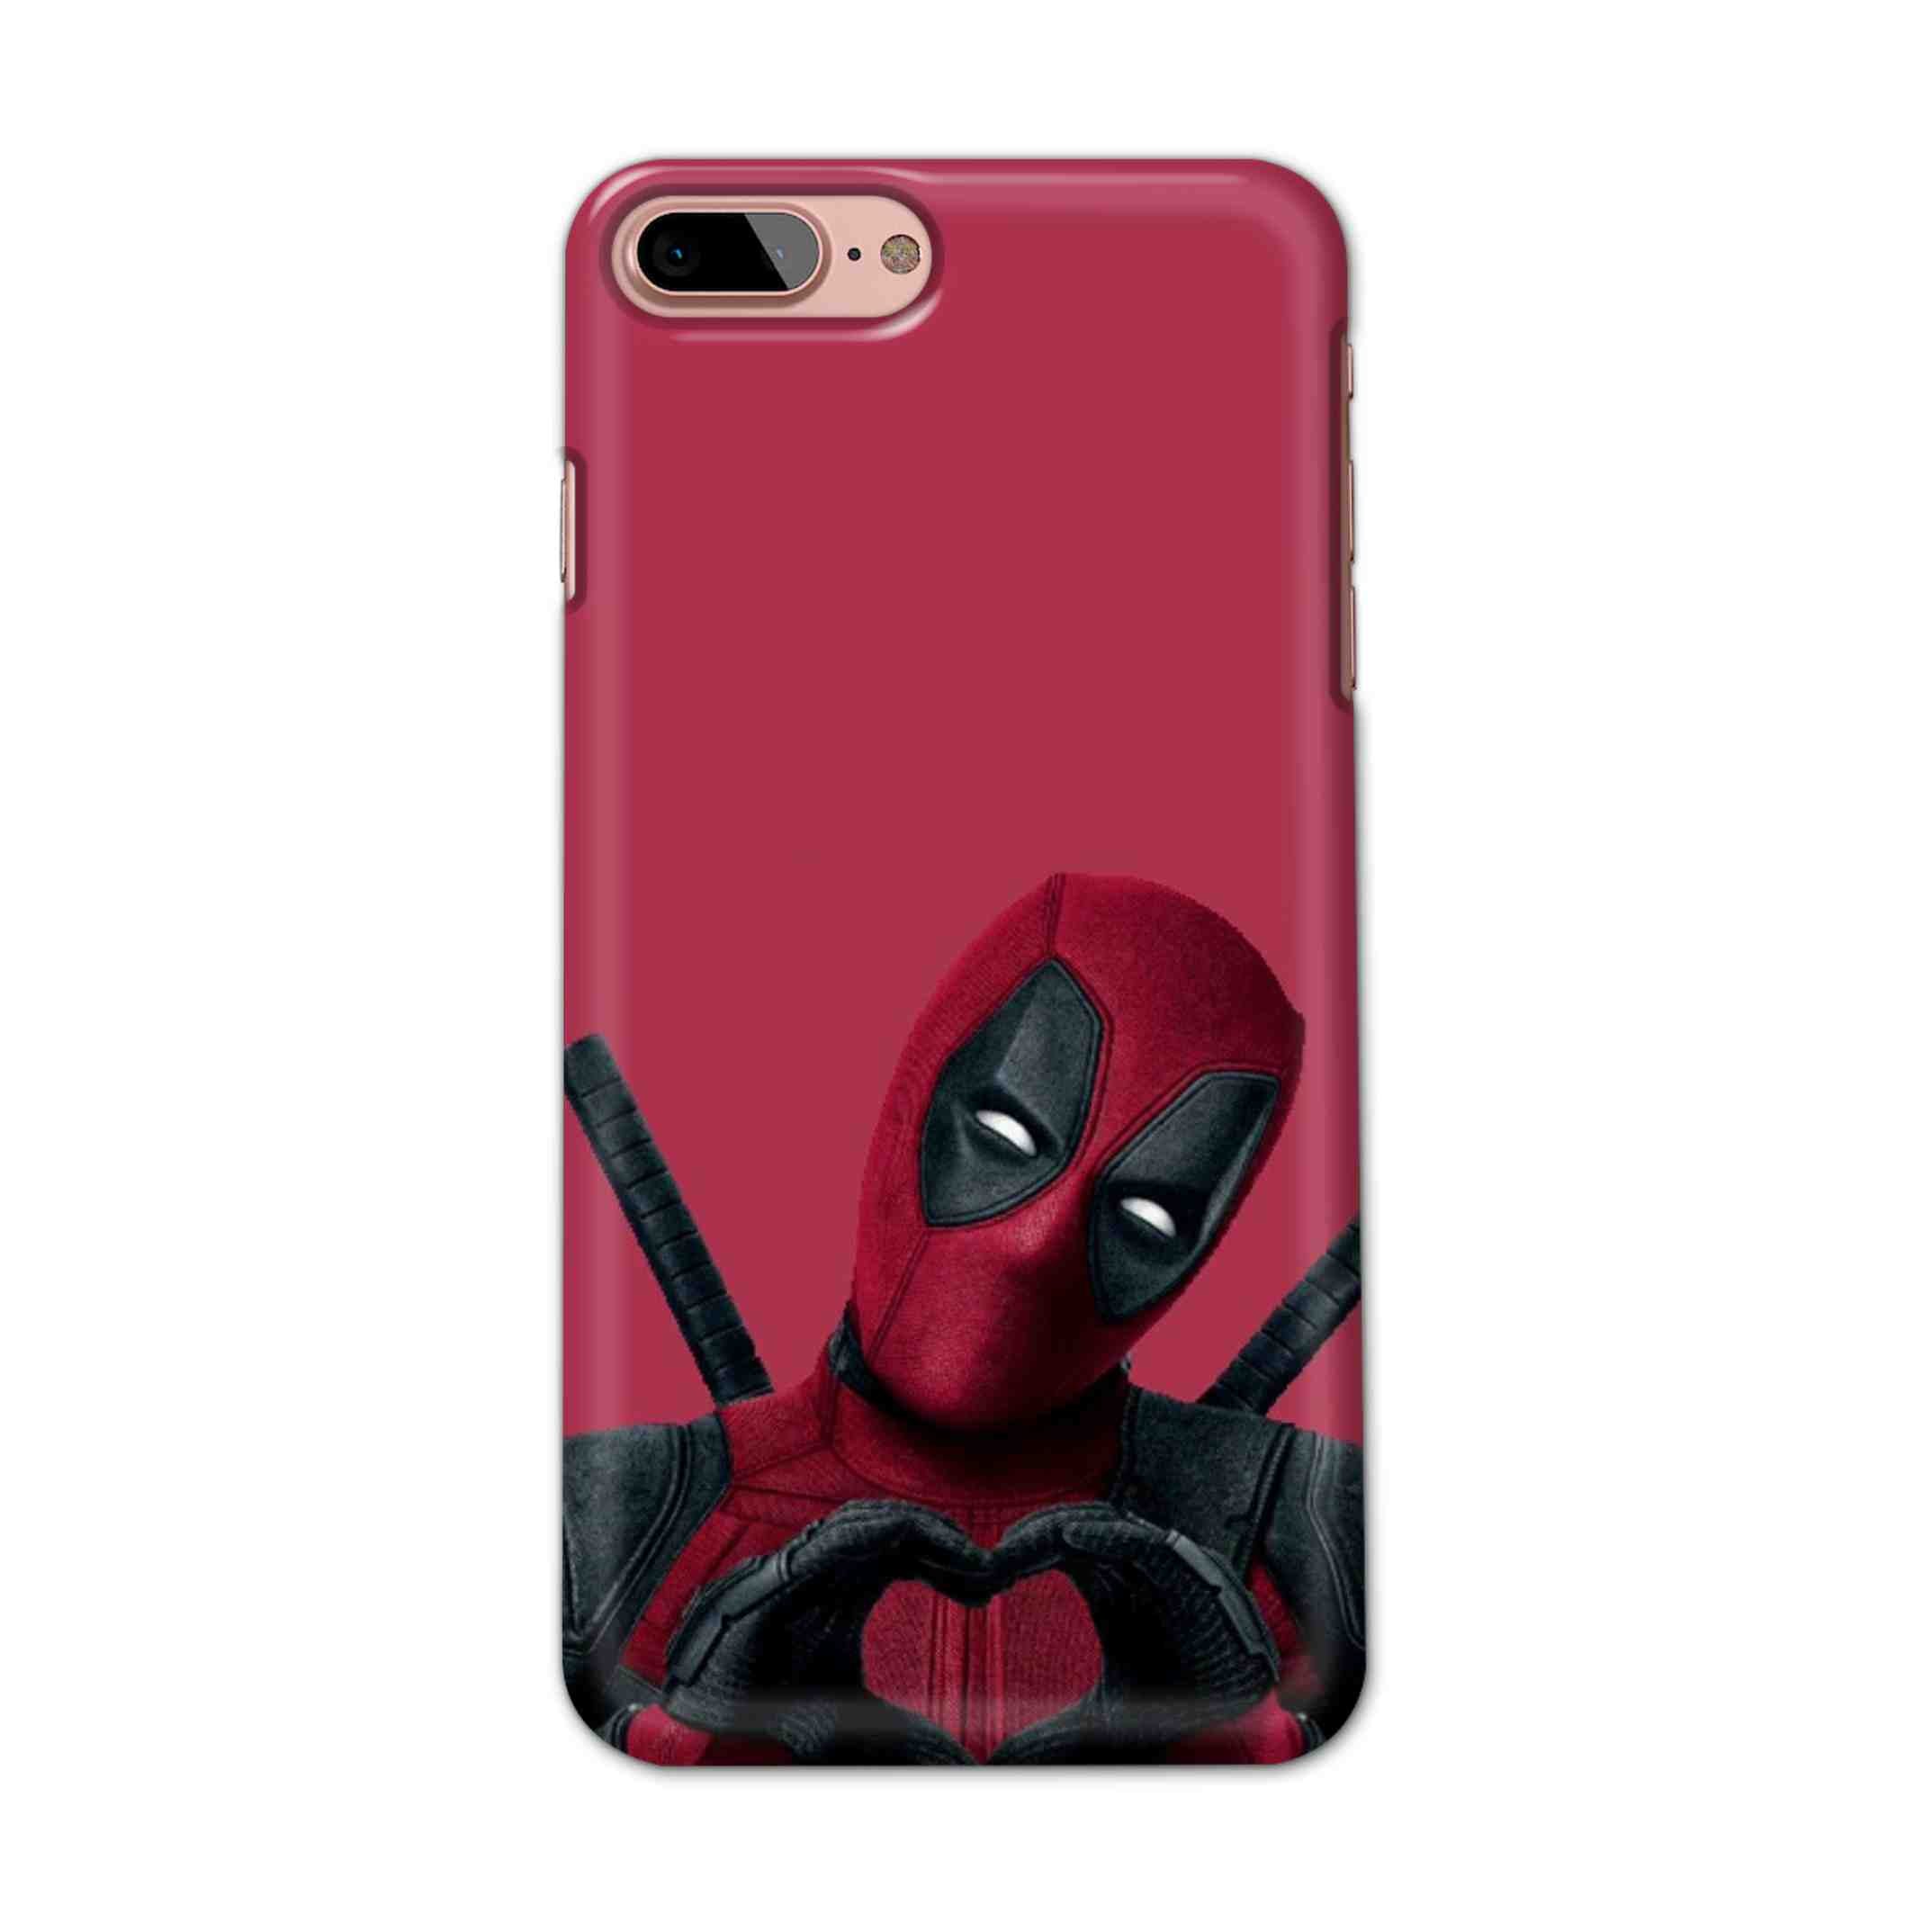 Buy Deadpool Heart Hard Back Mobile Phone Case/Cover For iPhone 7 Plus / 8 Plus Online